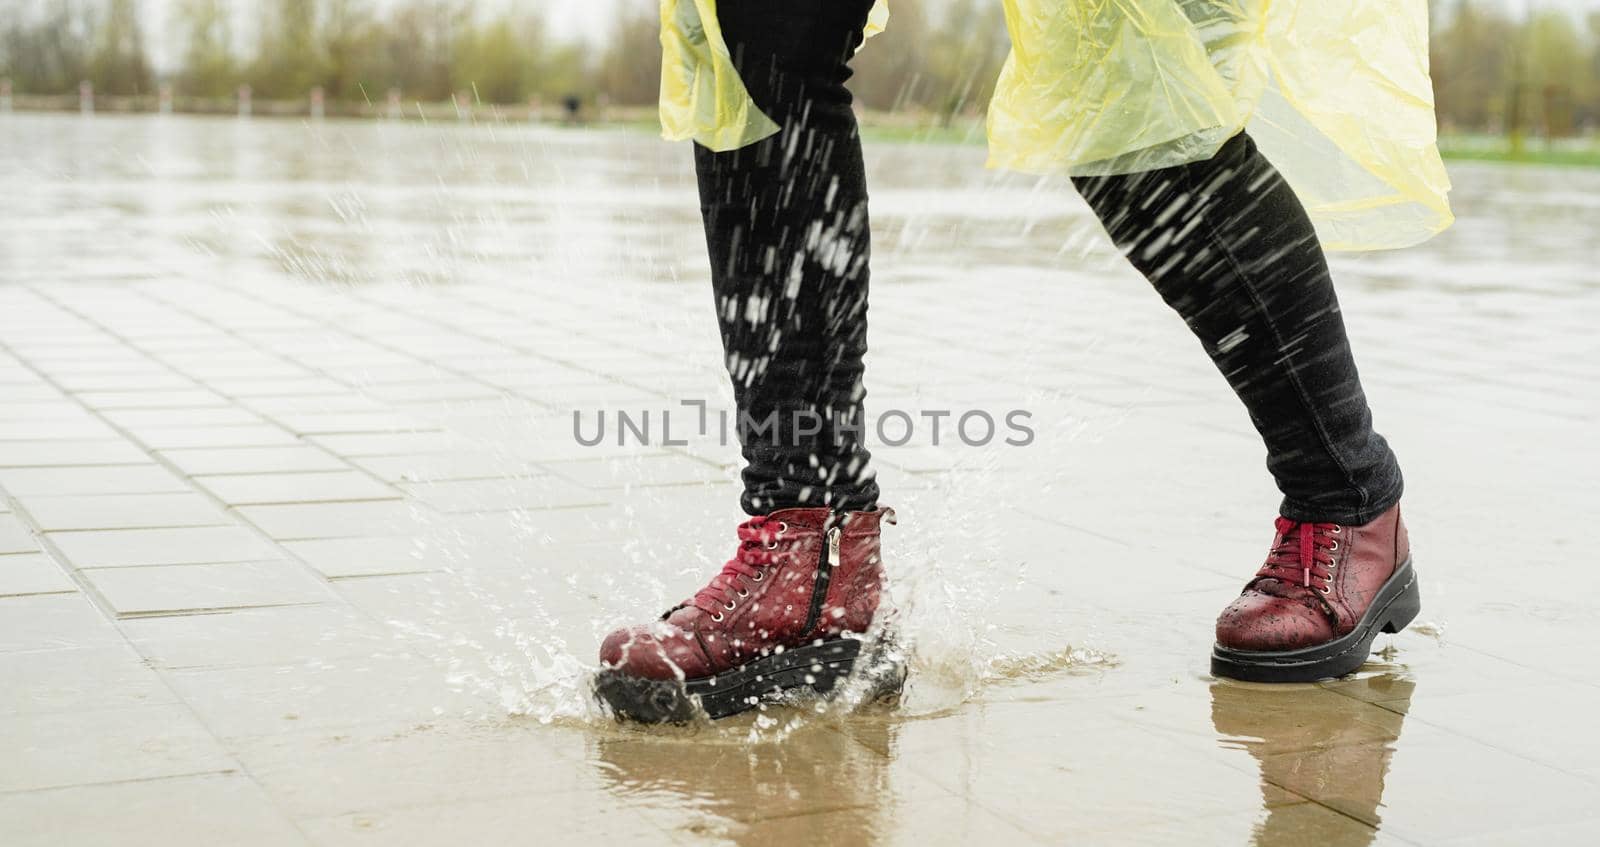 Woman playing in the rain, jumping in puddles with splashes by Desperada